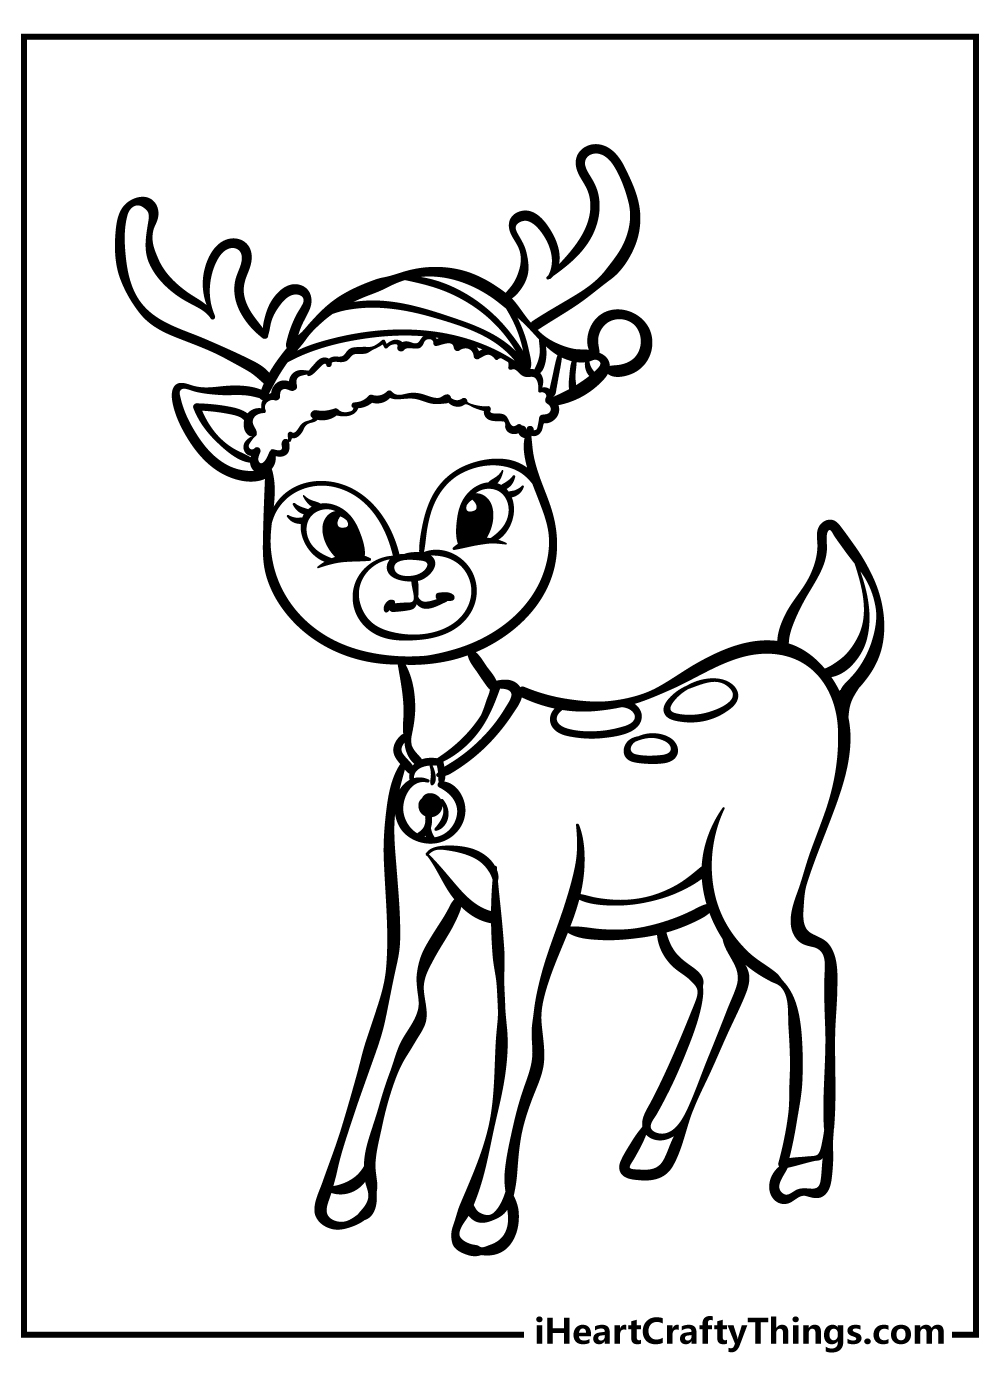 Rudolph Coloring Pages for preschoolers free printable